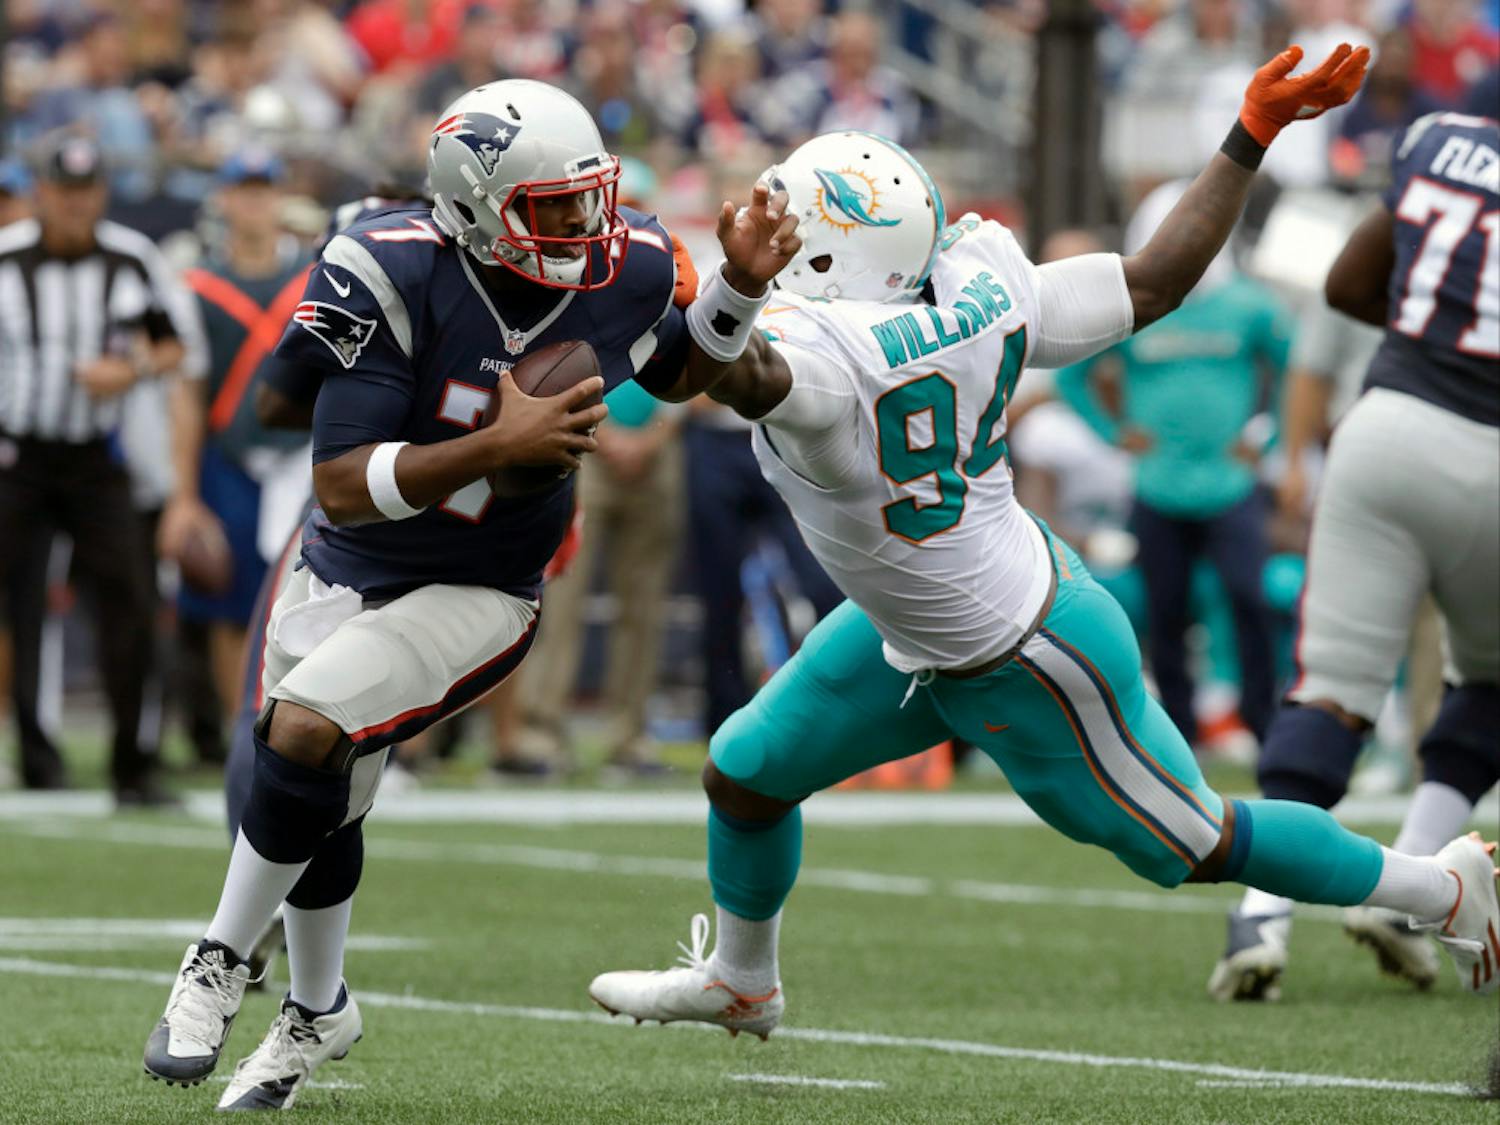 New England Patriots quarterback Jacoby Brissett (7) scrambles away from Miami Dolphins defensive end Mario Williams (94) during the second half of an NFL football game Sunday, Sept. 18, 2016, in Foxborough, Mass. (AP Photo/Charles Krupa)